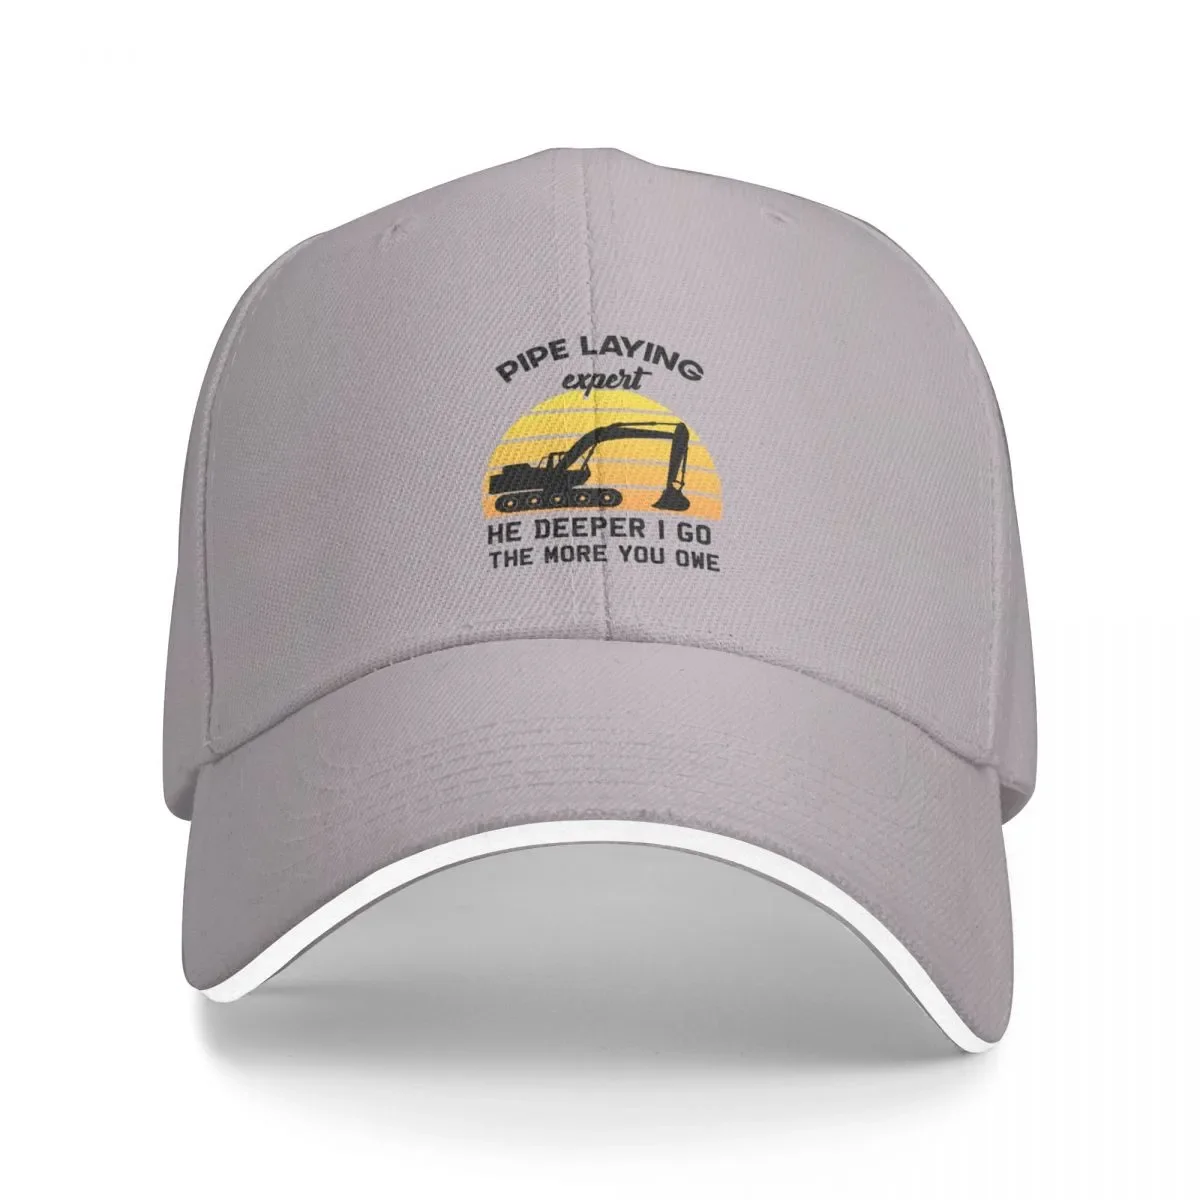 

New The Deeper I Go the More You Owe - Pipe Laying Expert Gift Cap Baseball Cap trucker hat hat man luxury boy child hat Women's